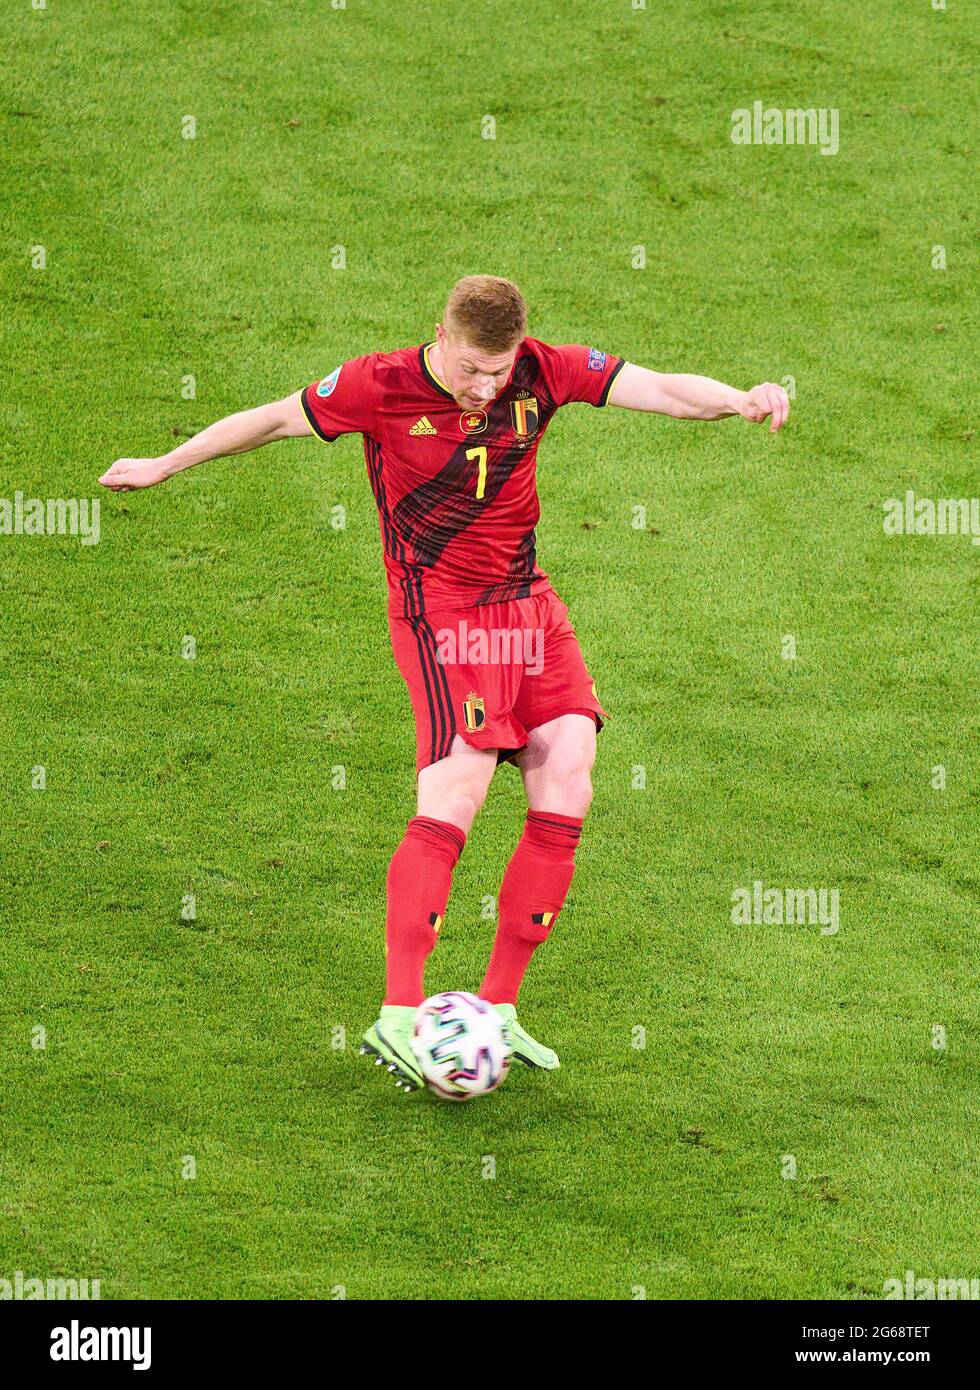 Kevin DE BRUYNE, Belgium Nr.7  in the quarterfinal match BELGIUM - ITALY 1-2 at the football UEFA European Championships 2020 in Season 2020/2021 on July 02, 2021  in Munich, Germany. © Peter Schatz / Alamy Live News Stock Photo